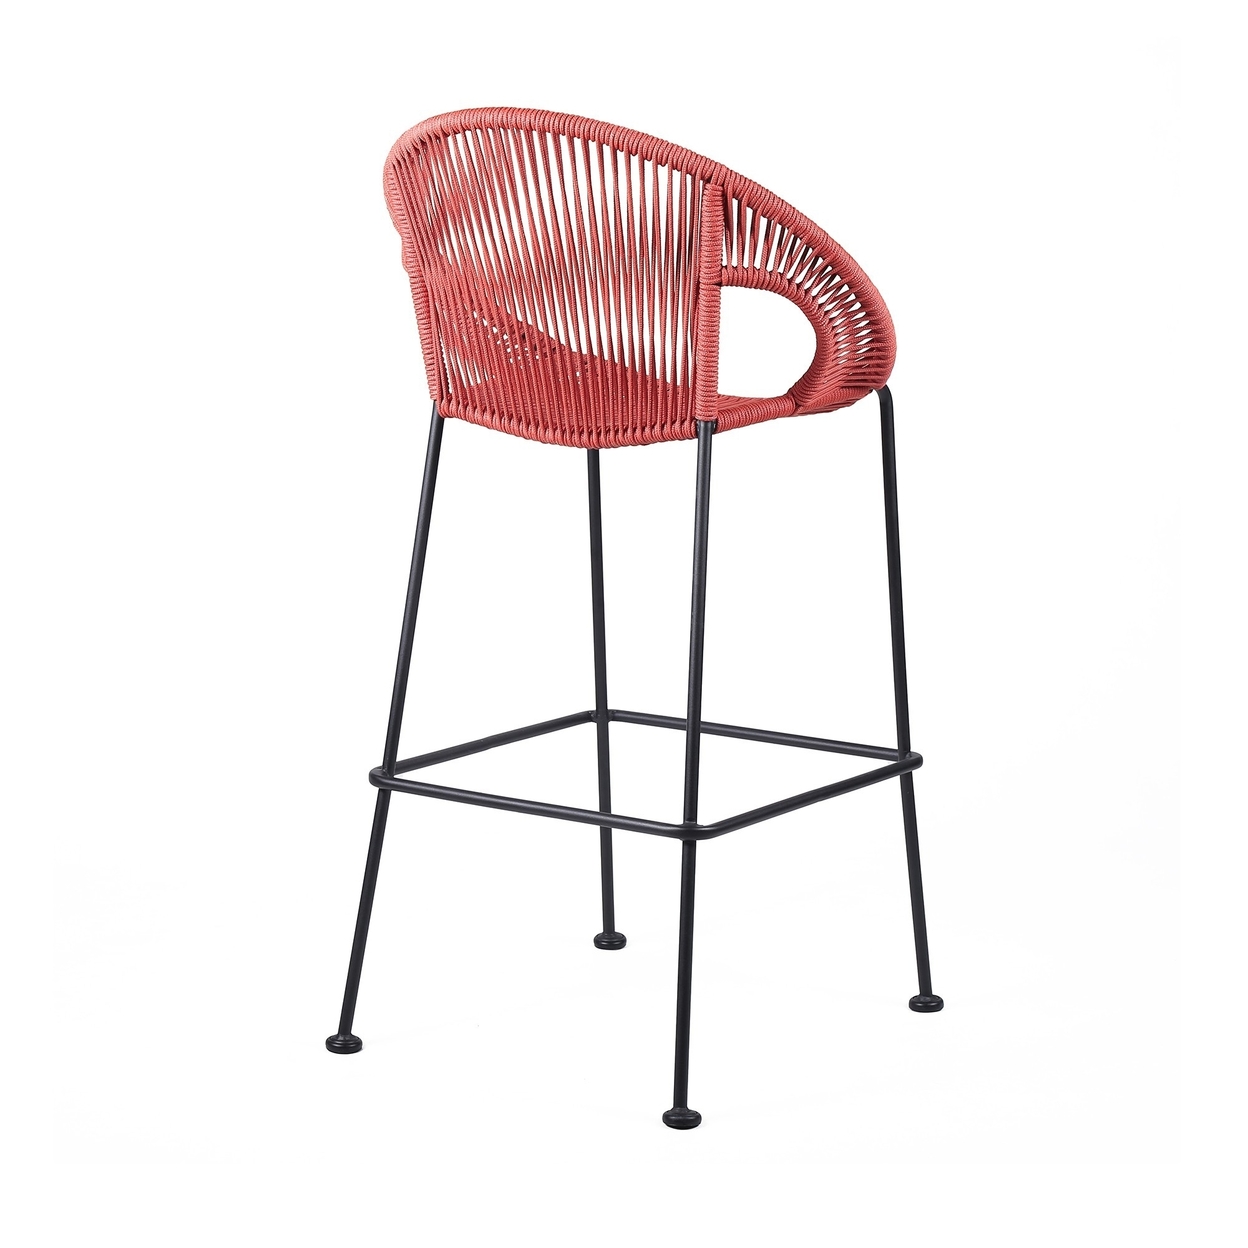 Indoor Outdoor Bar Stool With Rounded Rope Woven Seat, Pink- Saltoro Sherpi